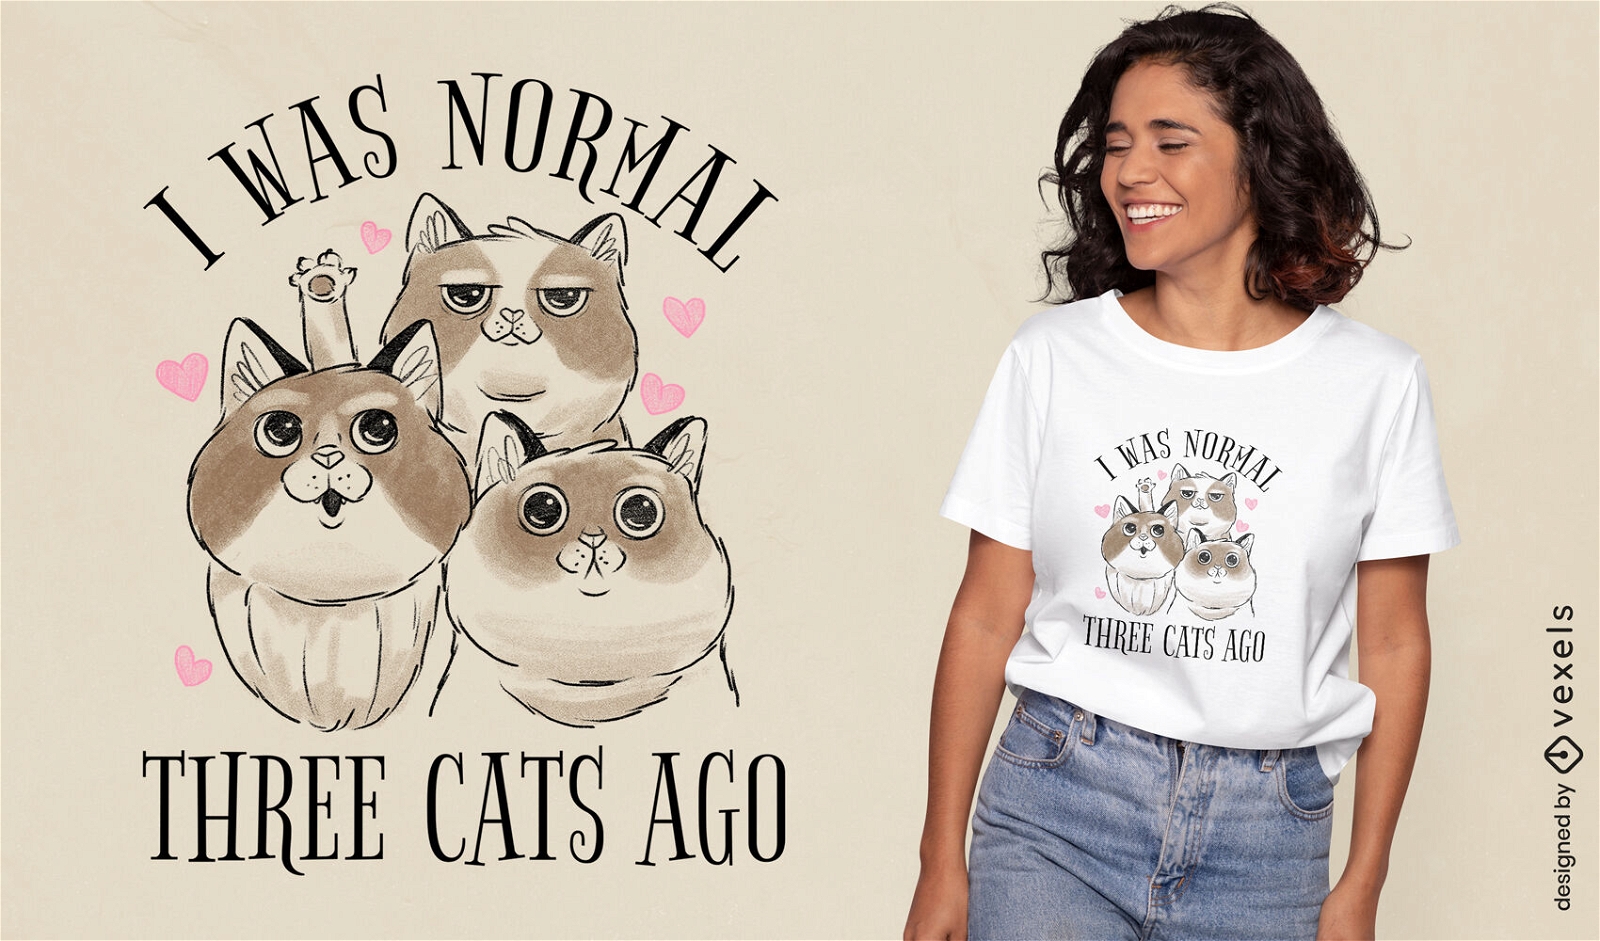 Normal before cats quote t-shirt design